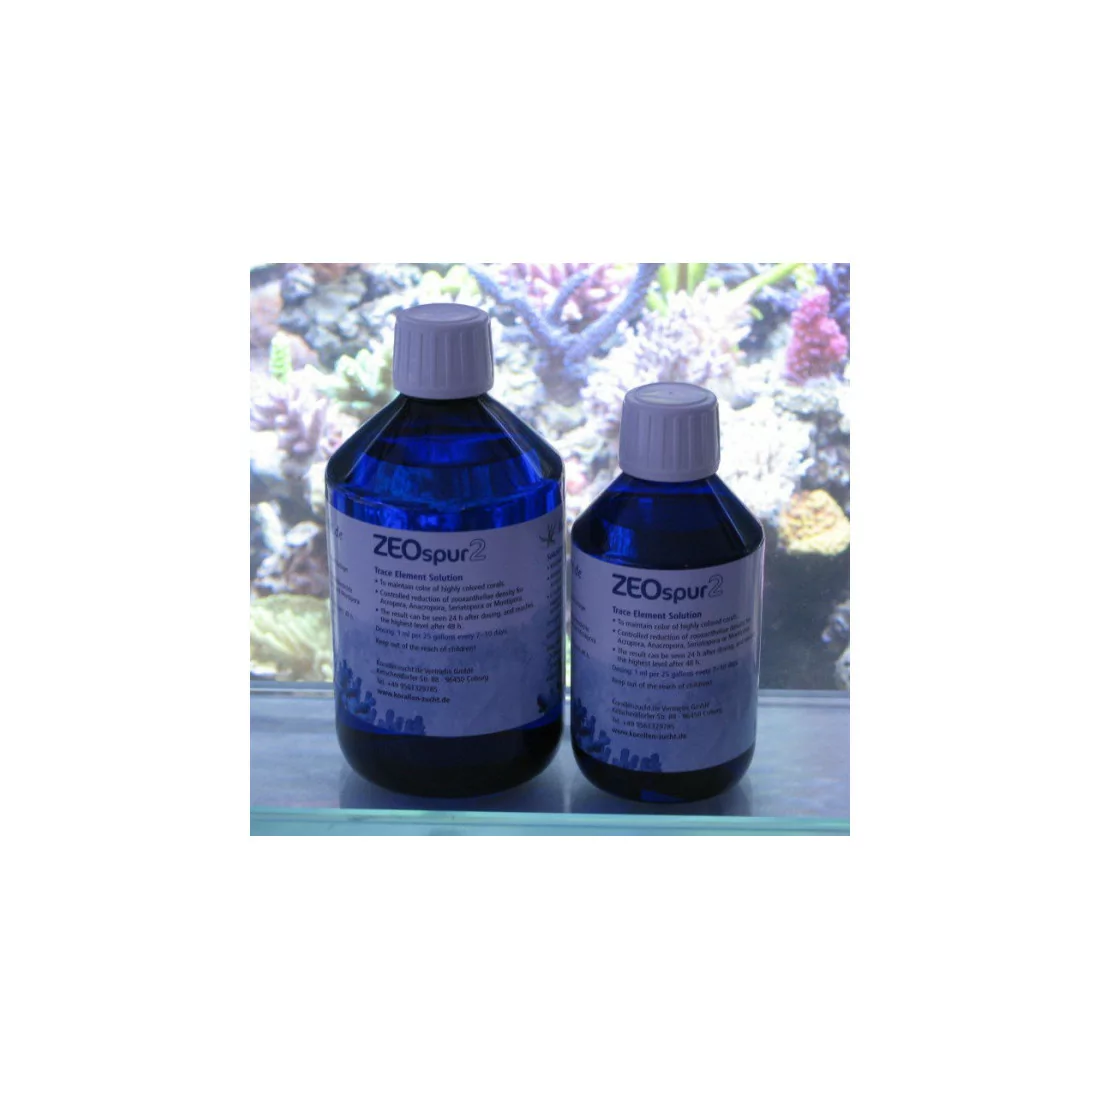 ZEOspur 2 Concentrate 250ml